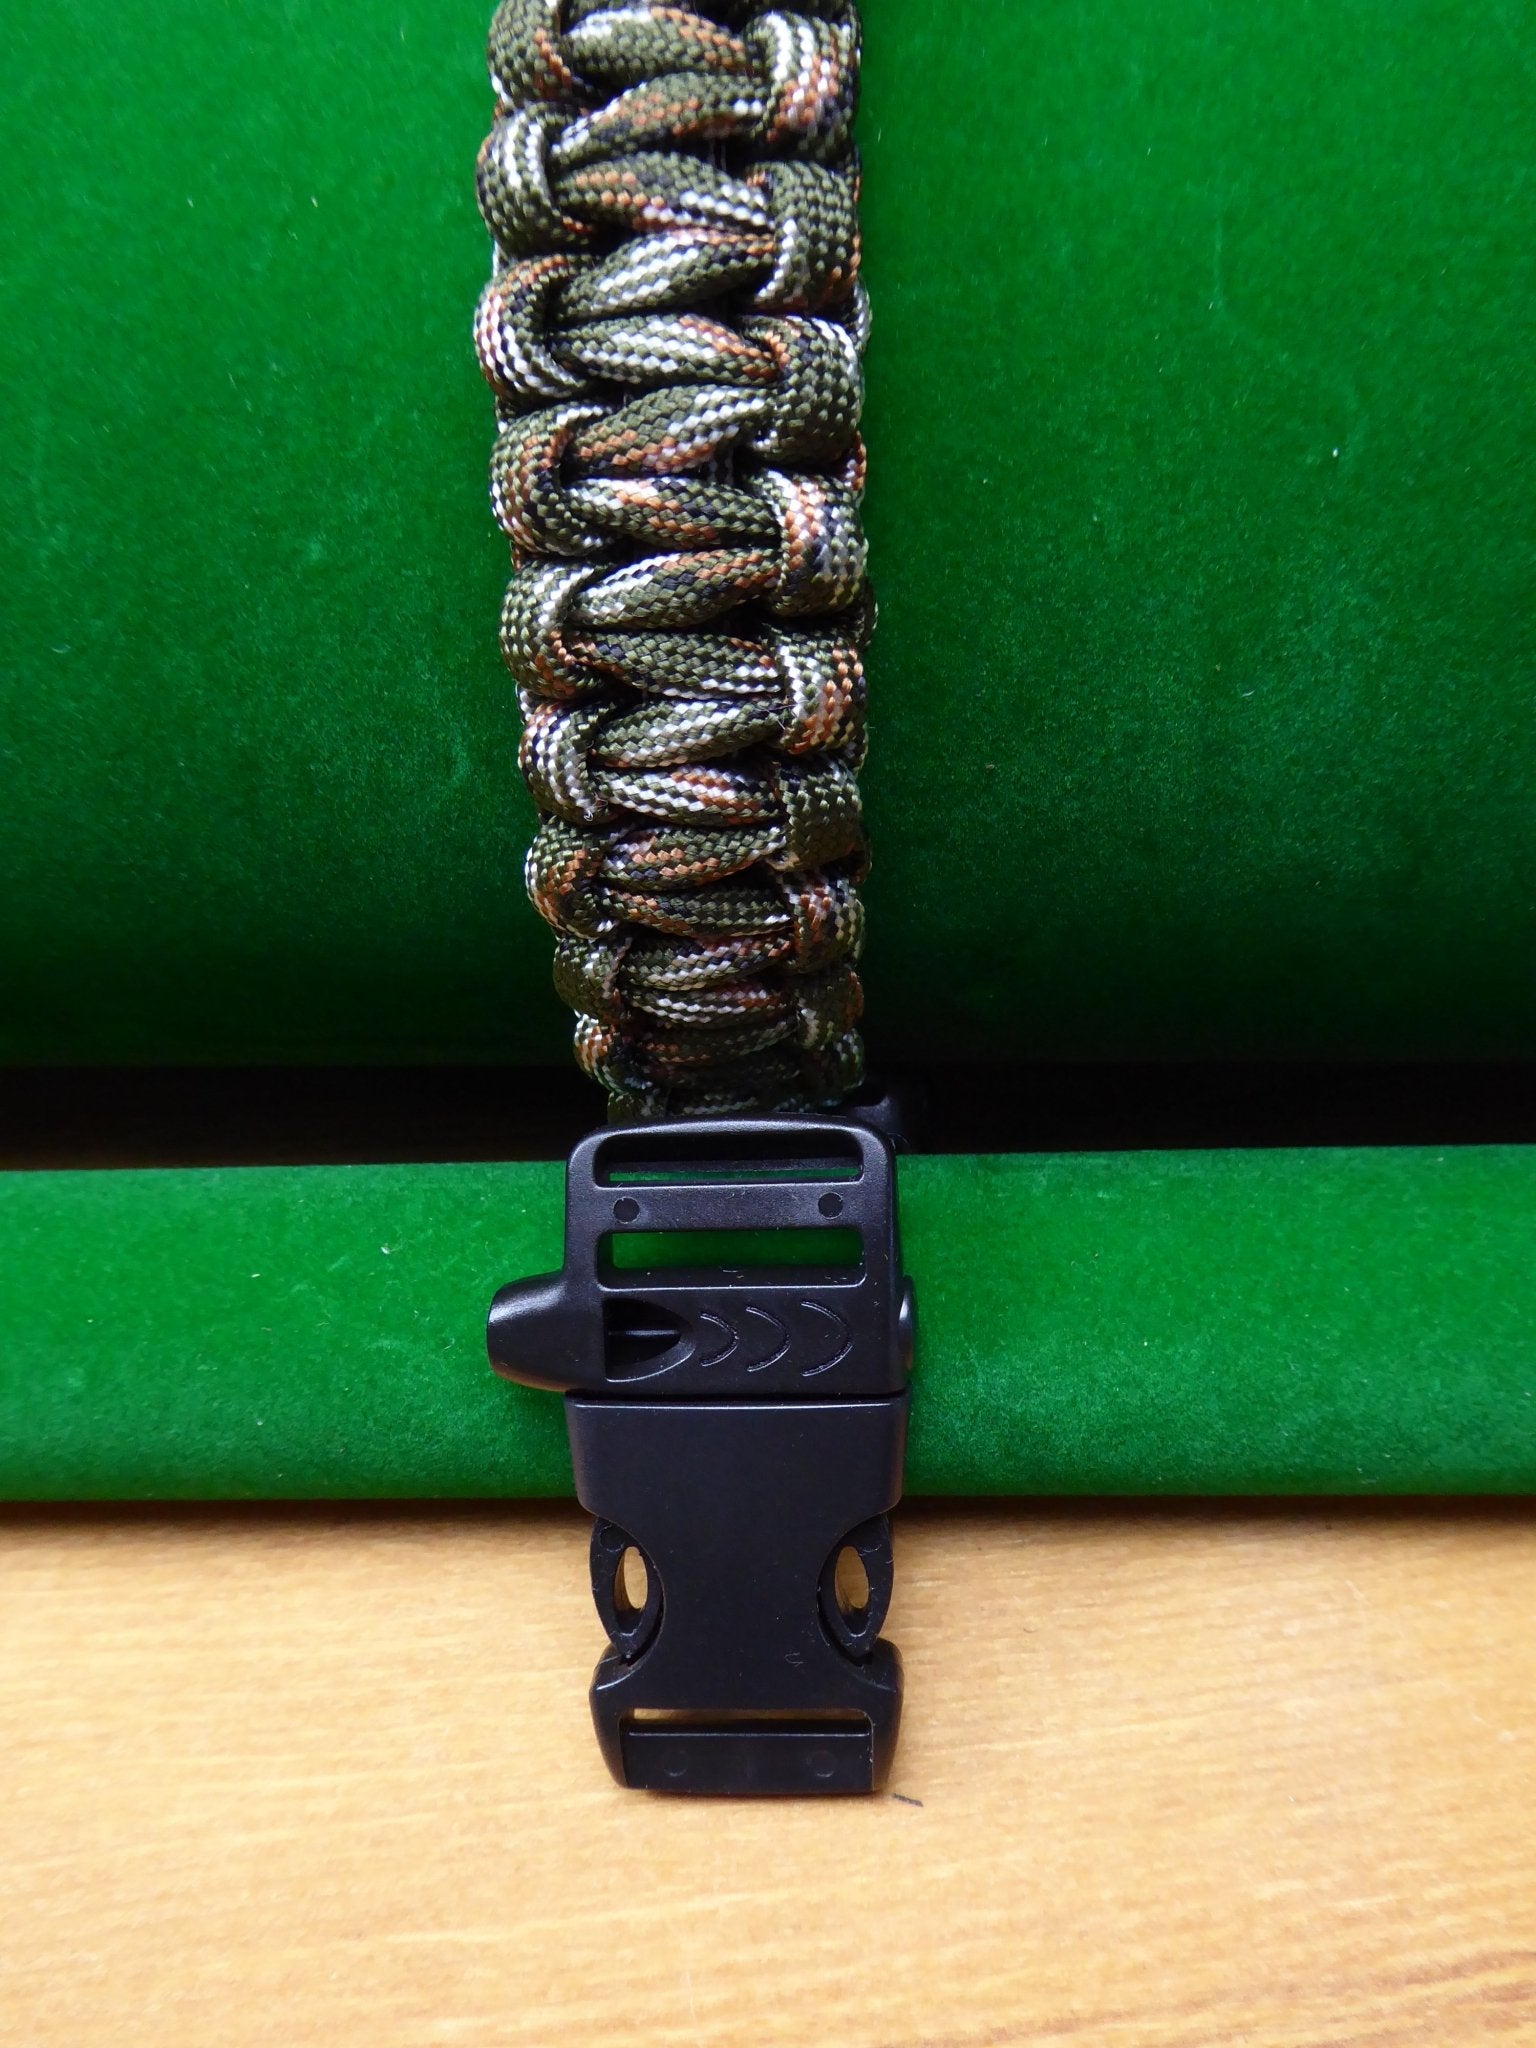 Paracord Buckle Bracelet kits with choice of colours Paracord Huggins Attic Green Camo Black Plastic whistle Buckle  [Huggins attic]